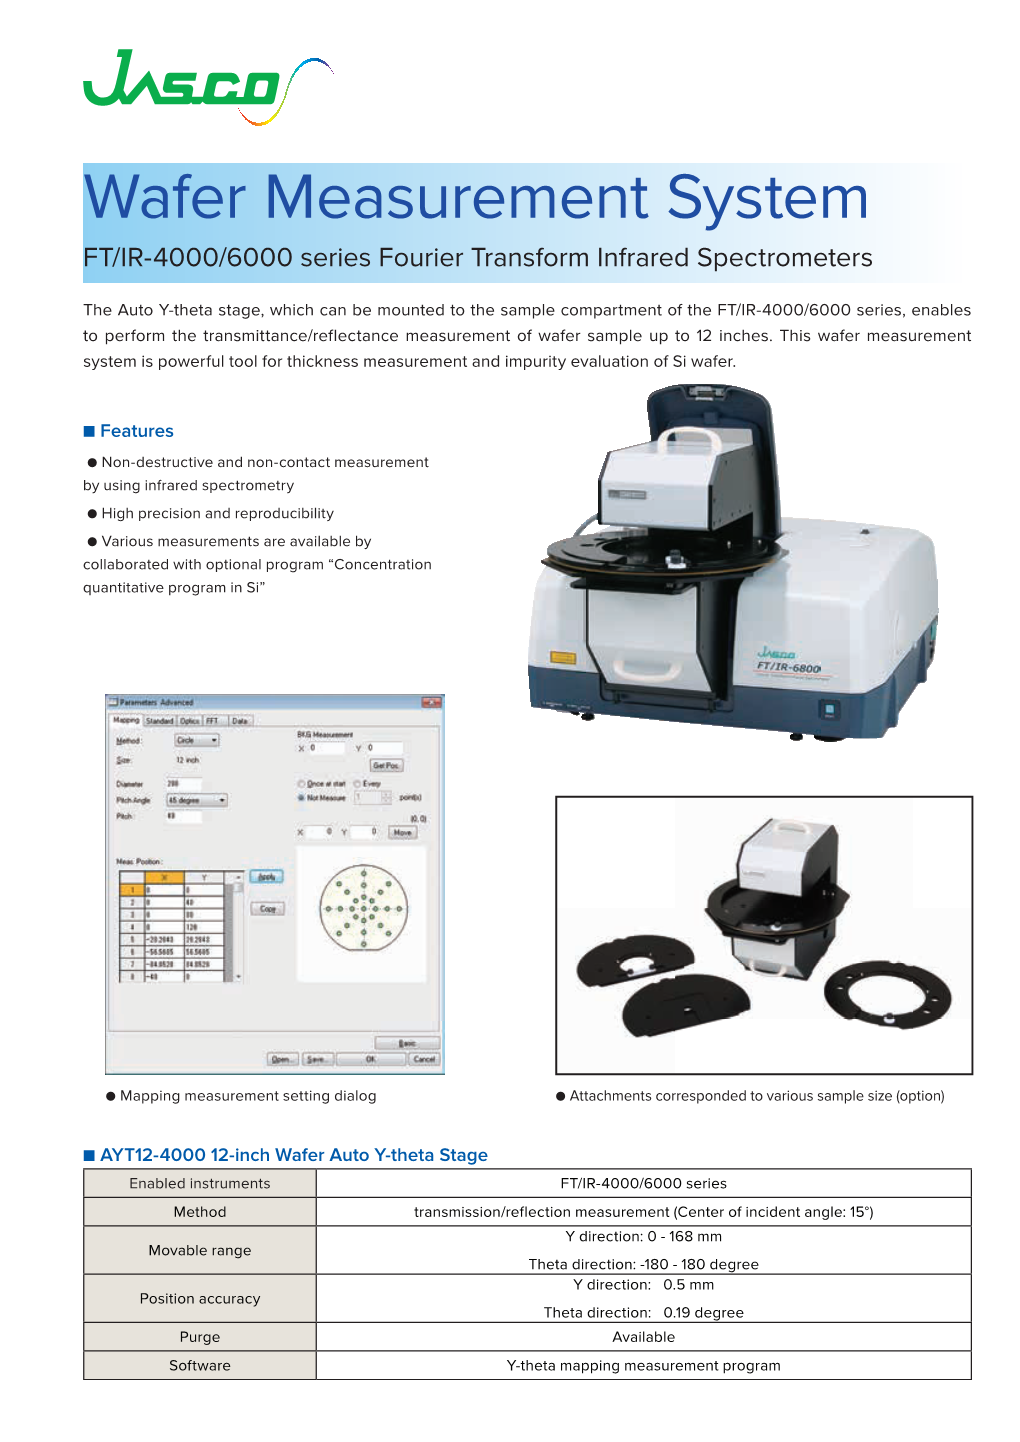 Wafer Measurement System FT/IR-4000/6000 Series Fourier Transform Infrared Spectrometers